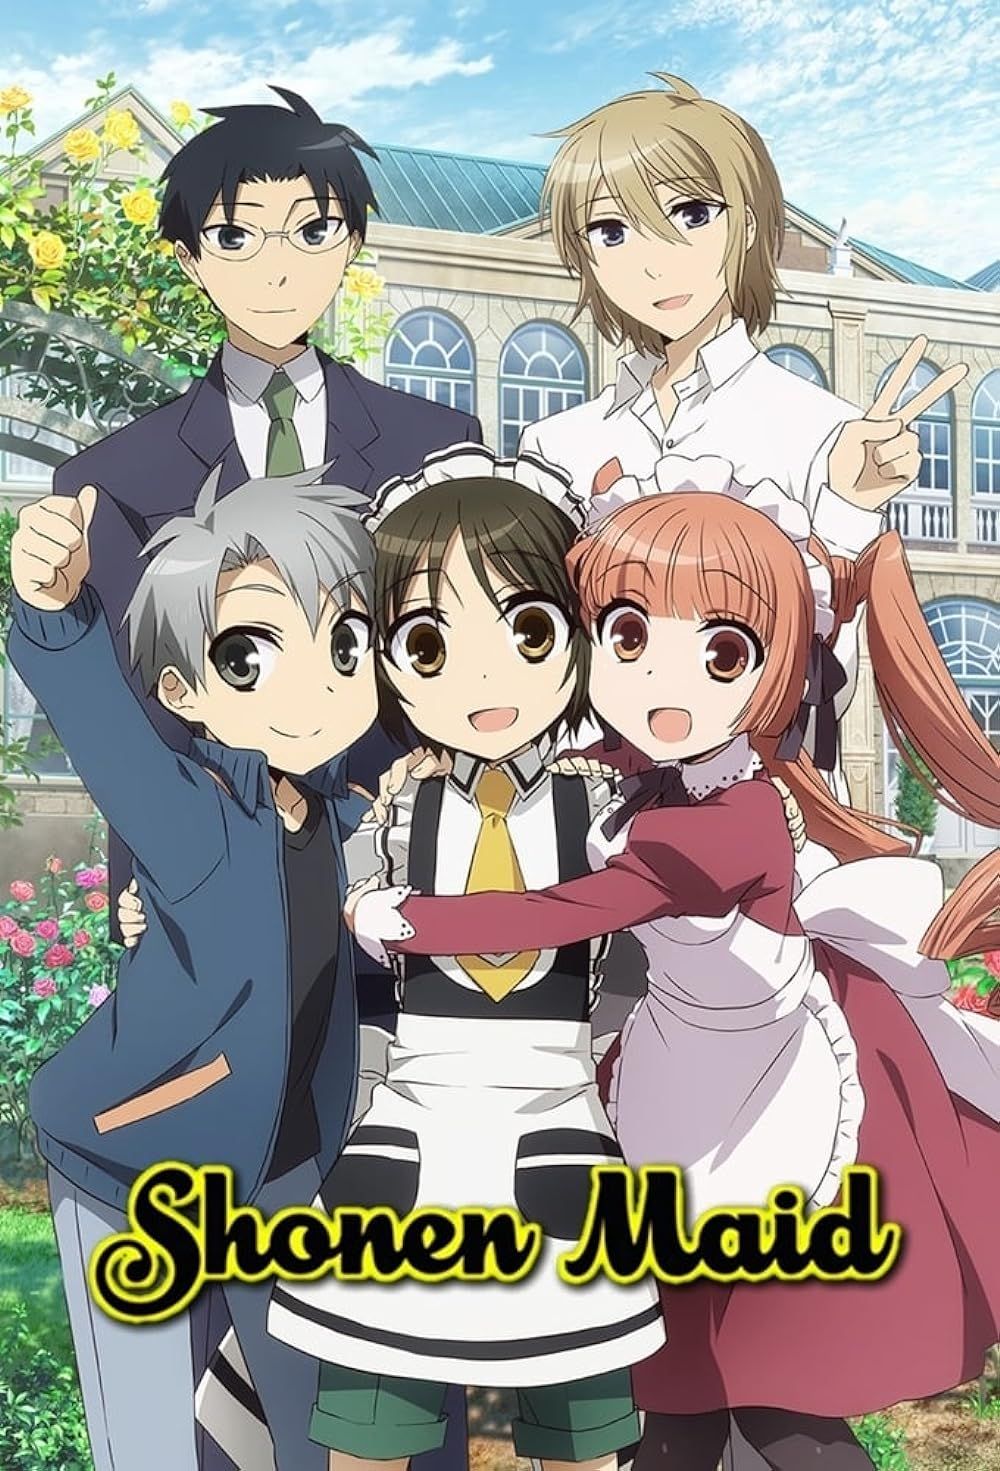 The Cast on the Promo for Shonen Maid